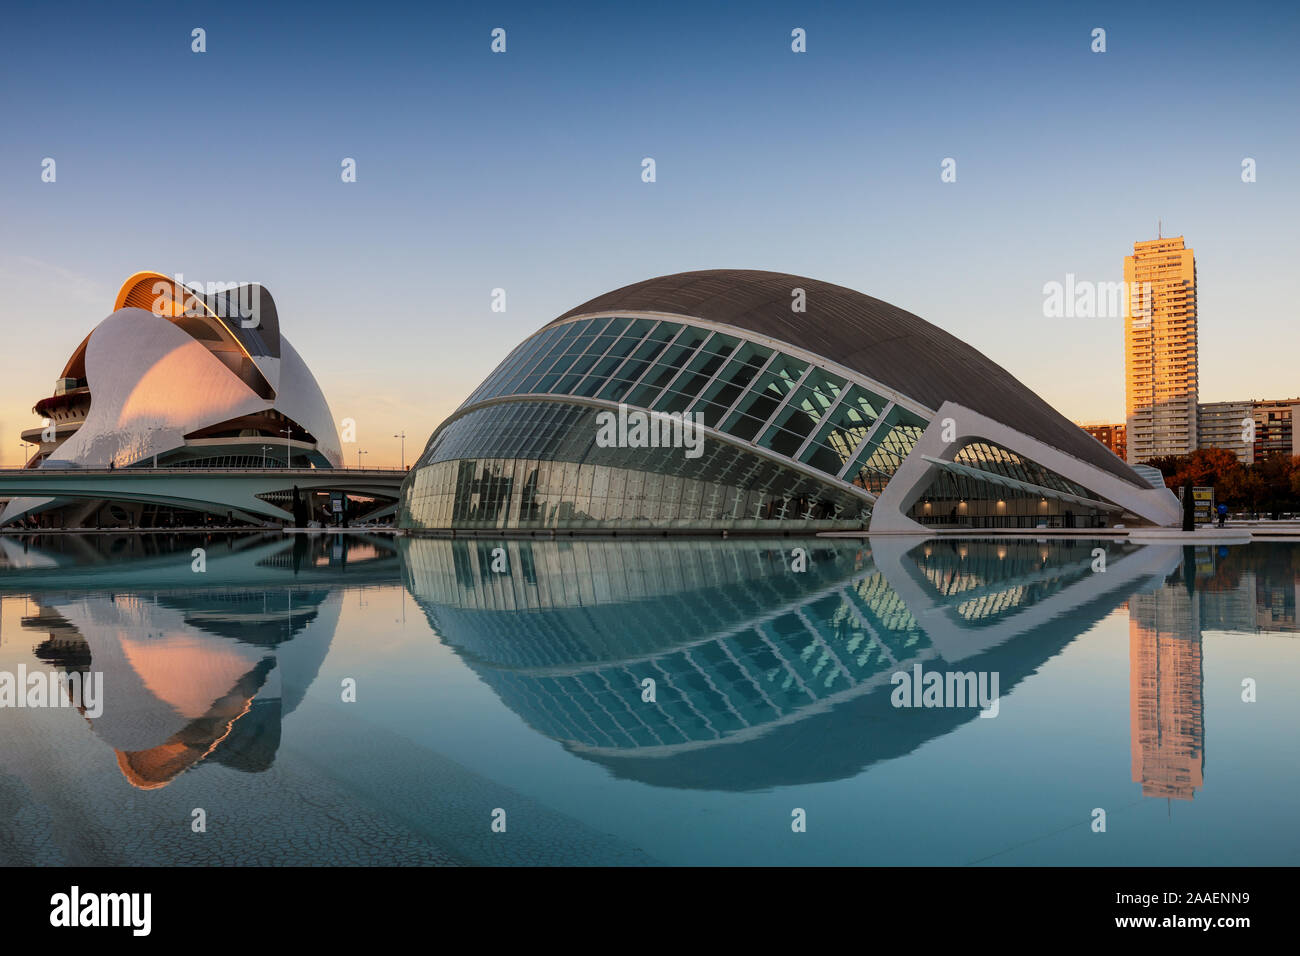 City of Arts and Sciences in the early morning, designed by Calatrava, Valencia, Spain Stock Photo